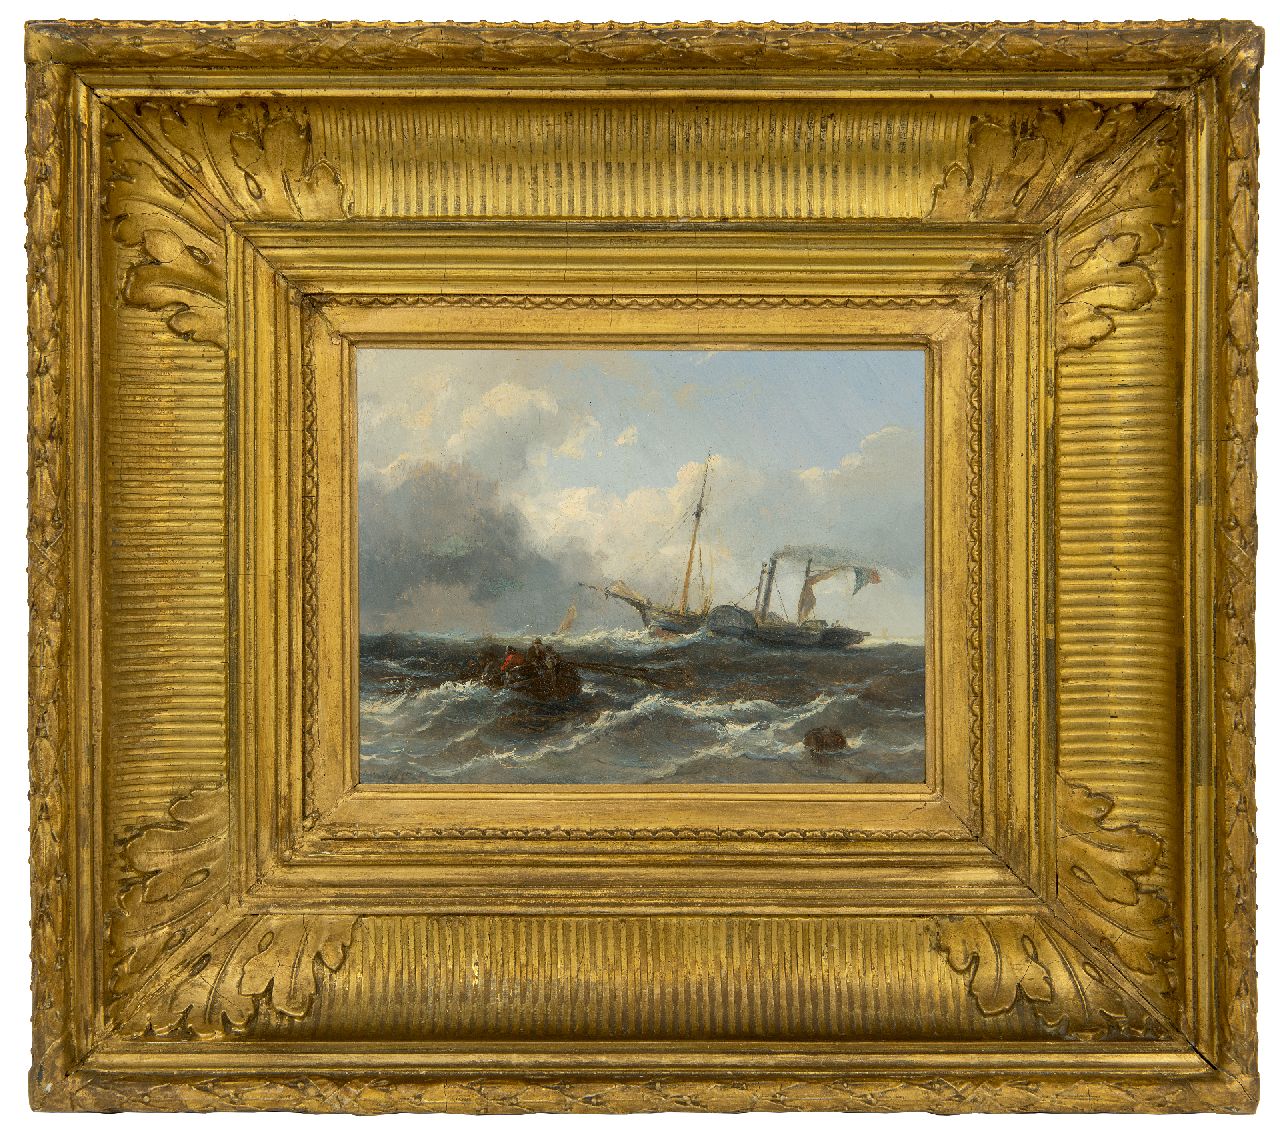 Meijer J.H.L.  | Johan Hendrik 'Louis' Meijer | Paintings offered for sale | Rowing boat and a steamship at sea, oil on panel 14.9 x 19.0 cm, signed l.r.